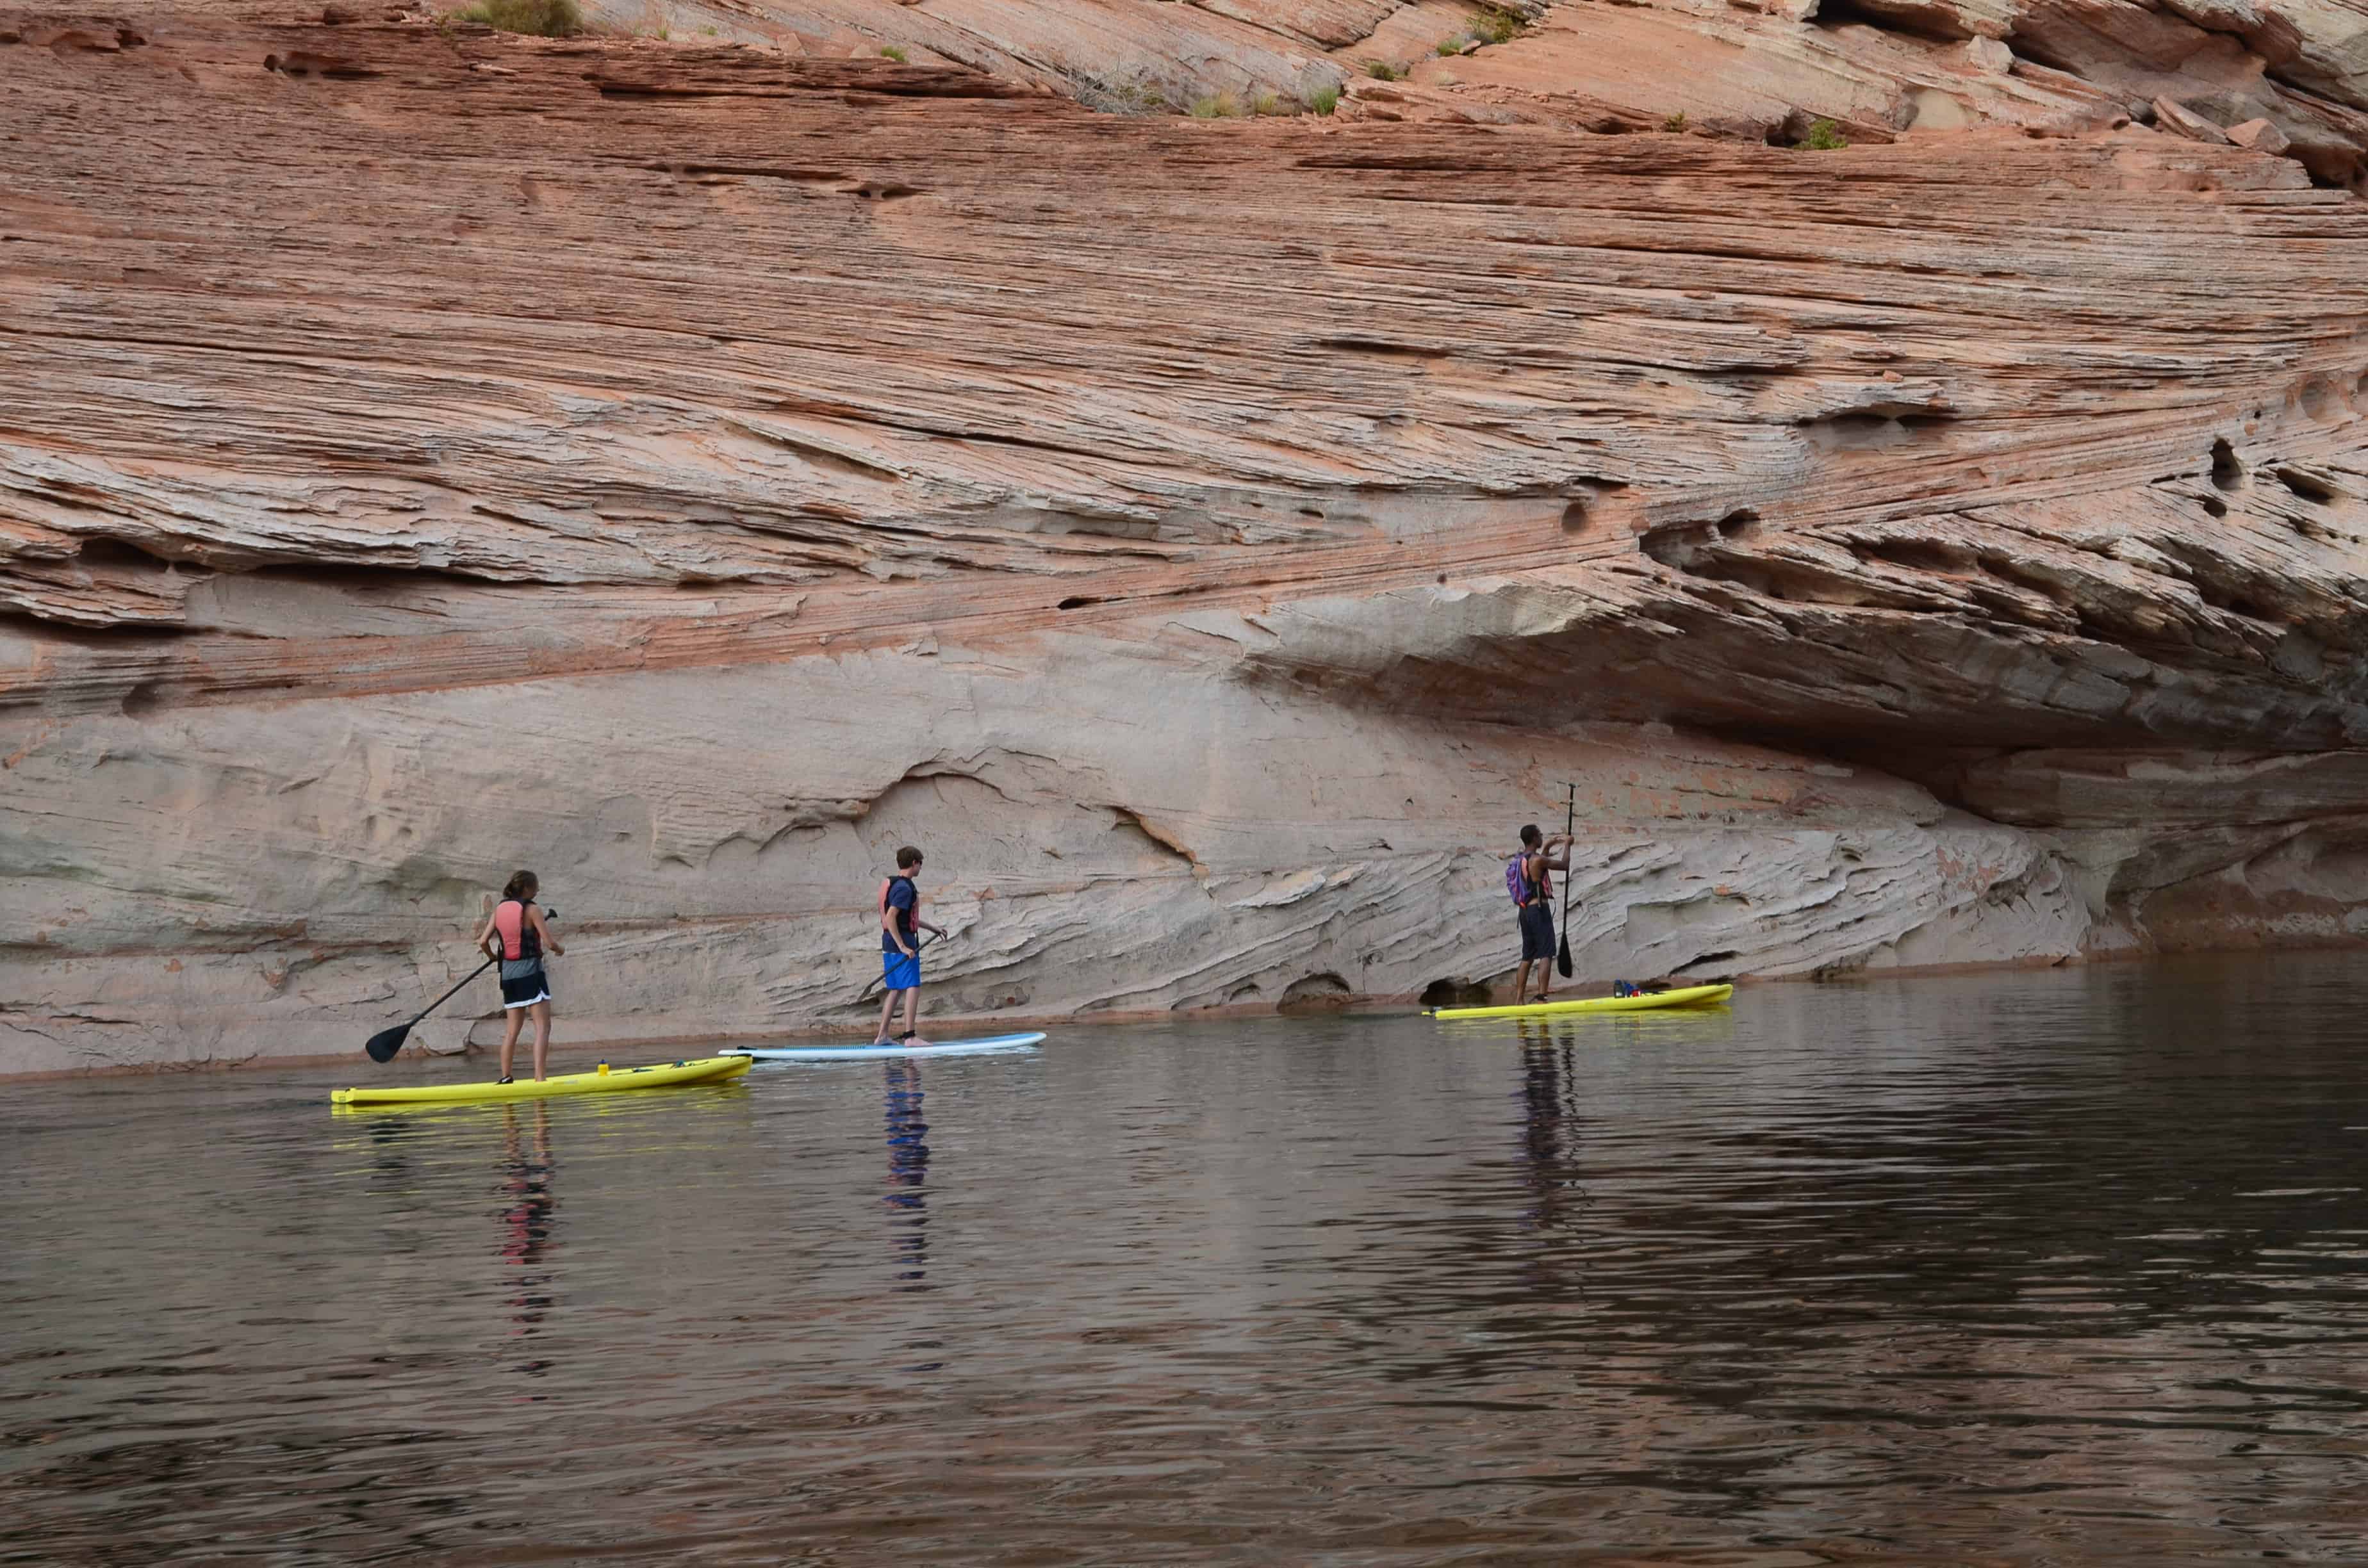 Stand-up paddlers on Lake Powell at Glen Canyon National Recreation Area in Arizona